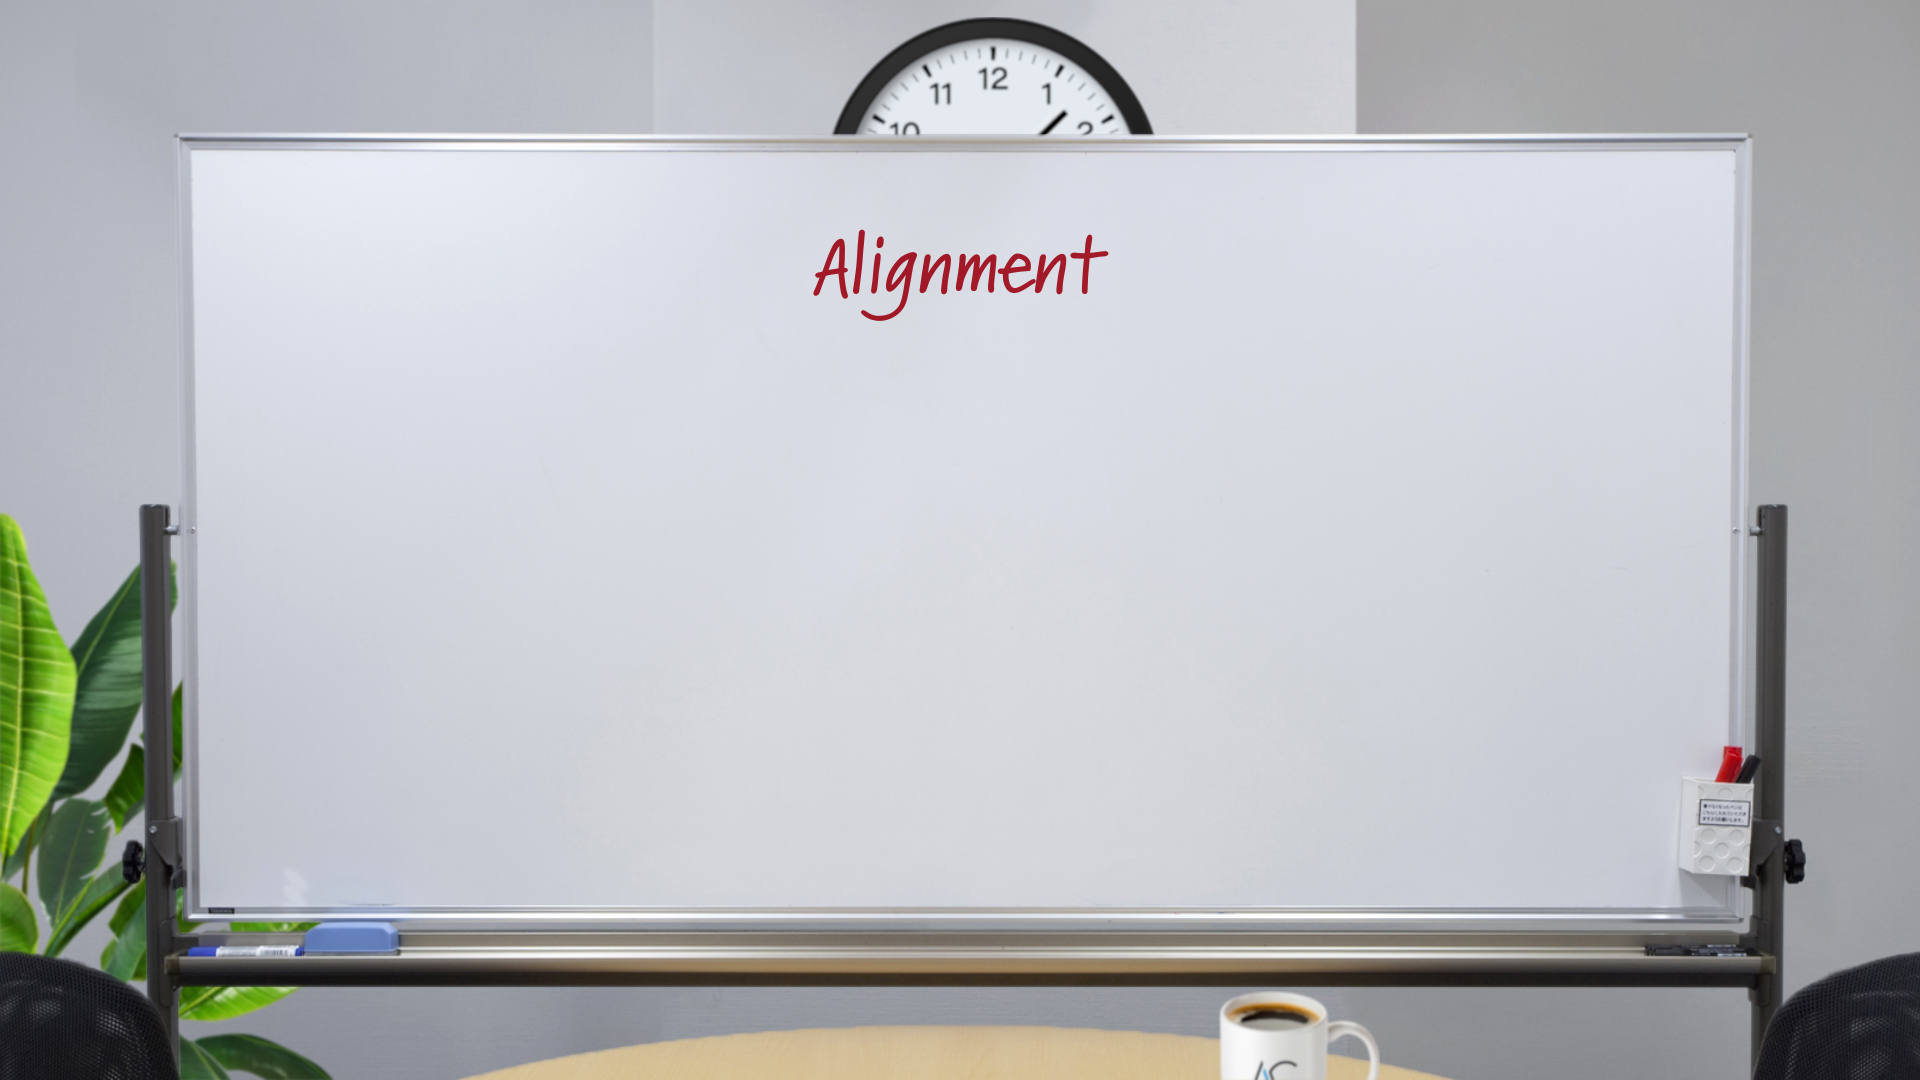 Whiteboard, in an office setting with a clock, conference table, steaming coffee mug, and plants, with the word "Alignment" written on it in red marker.